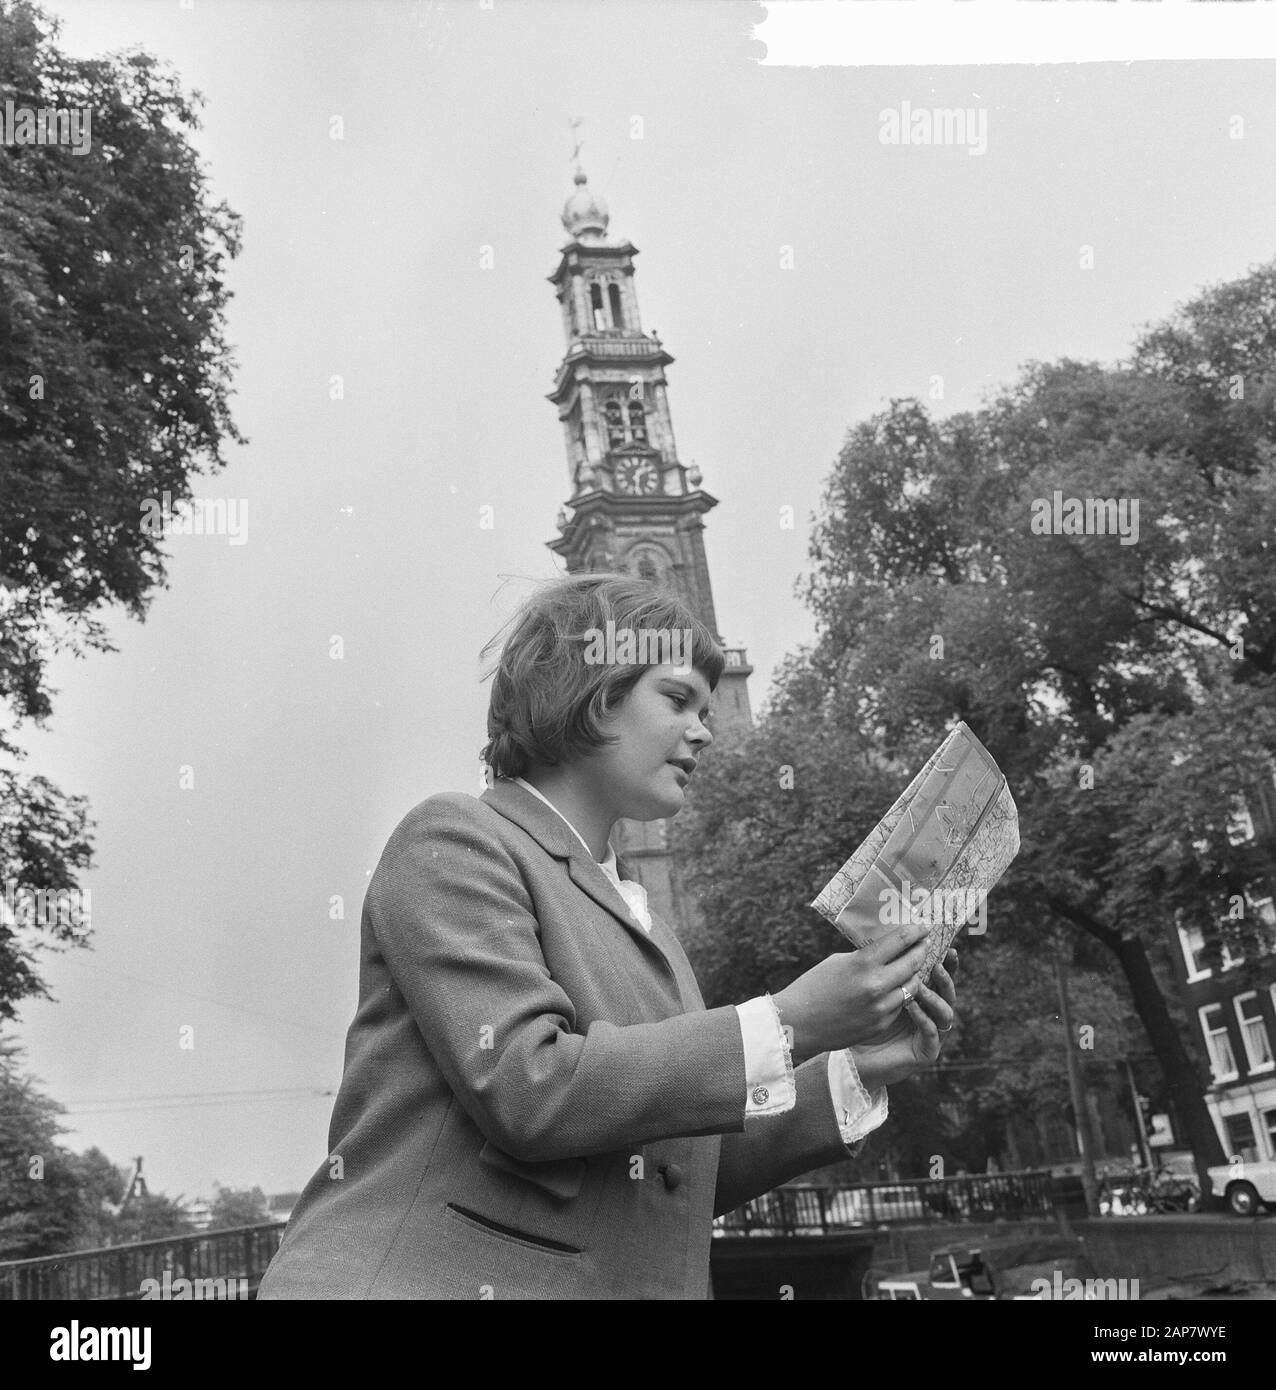 The Westertoren sagging 84,5 cm from the lead, the Westertoren somewhat overly skewed Date: July 3, 1964 Keywords: towers Institution name: Westertoren Stock Photo